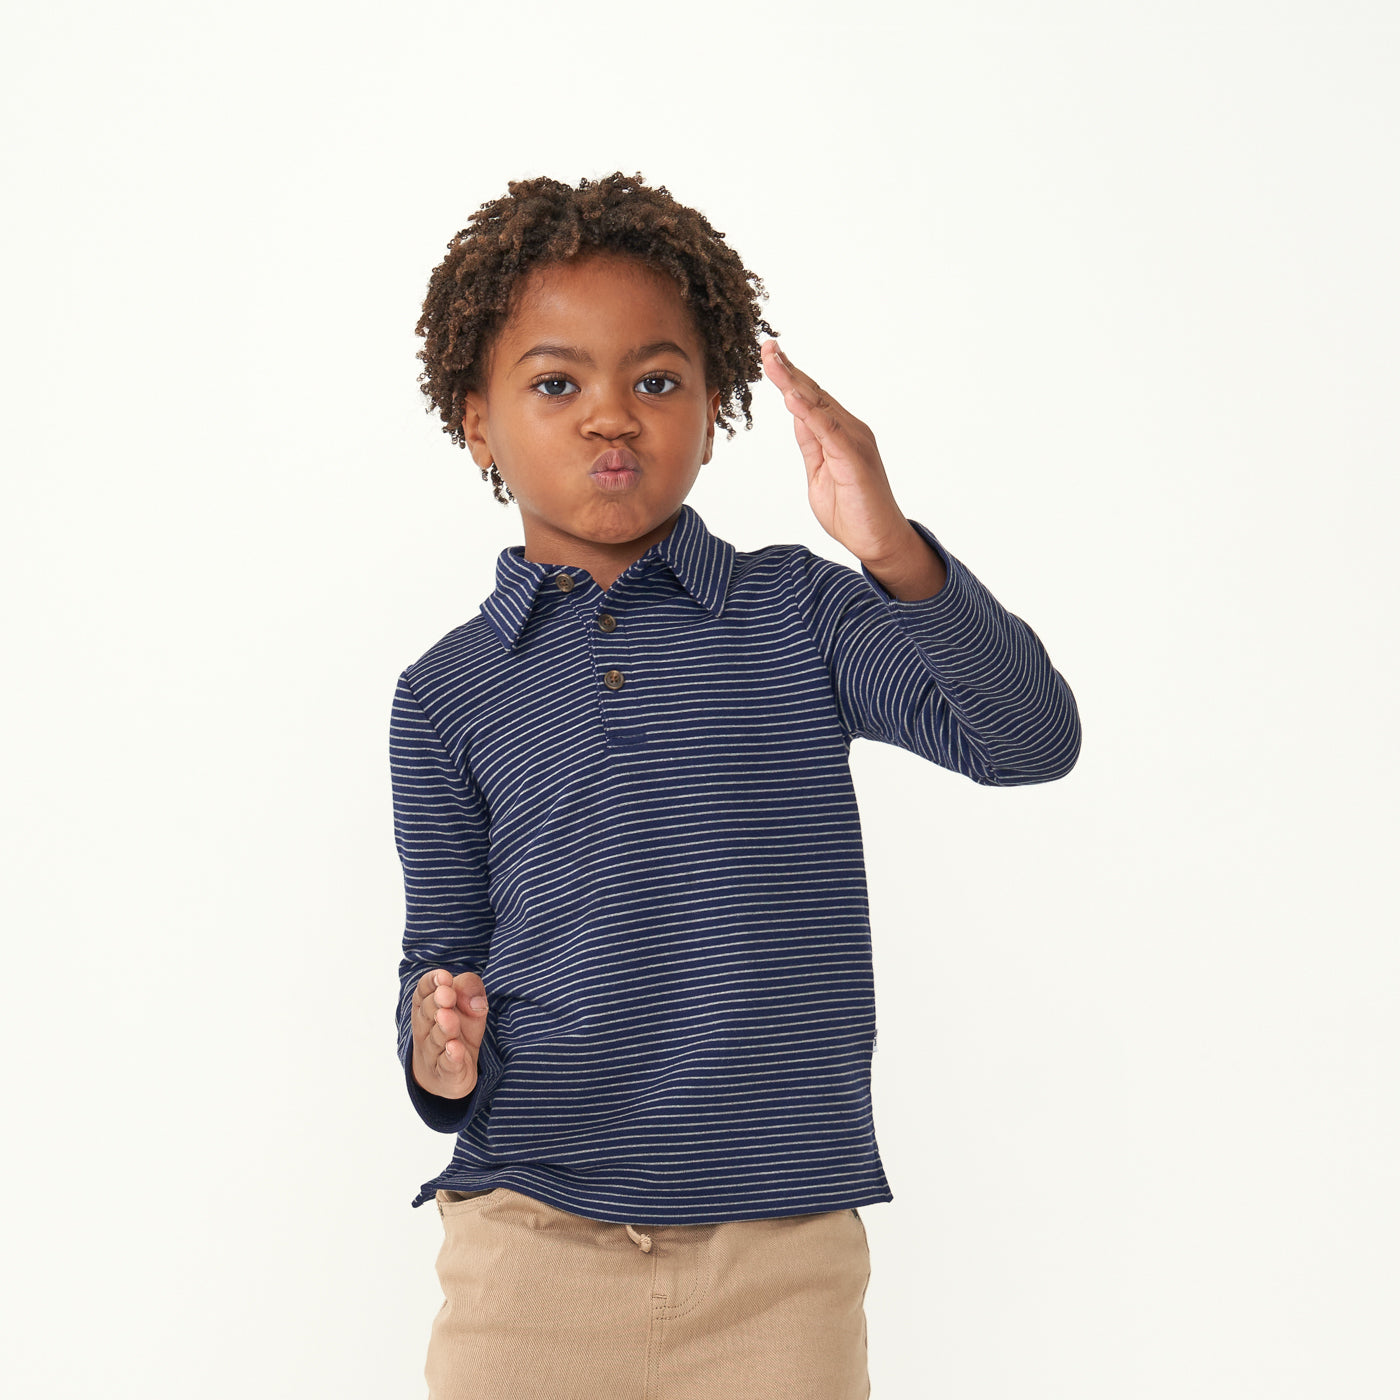 Child playing wearing a Classic Navy Stripes polo shirt